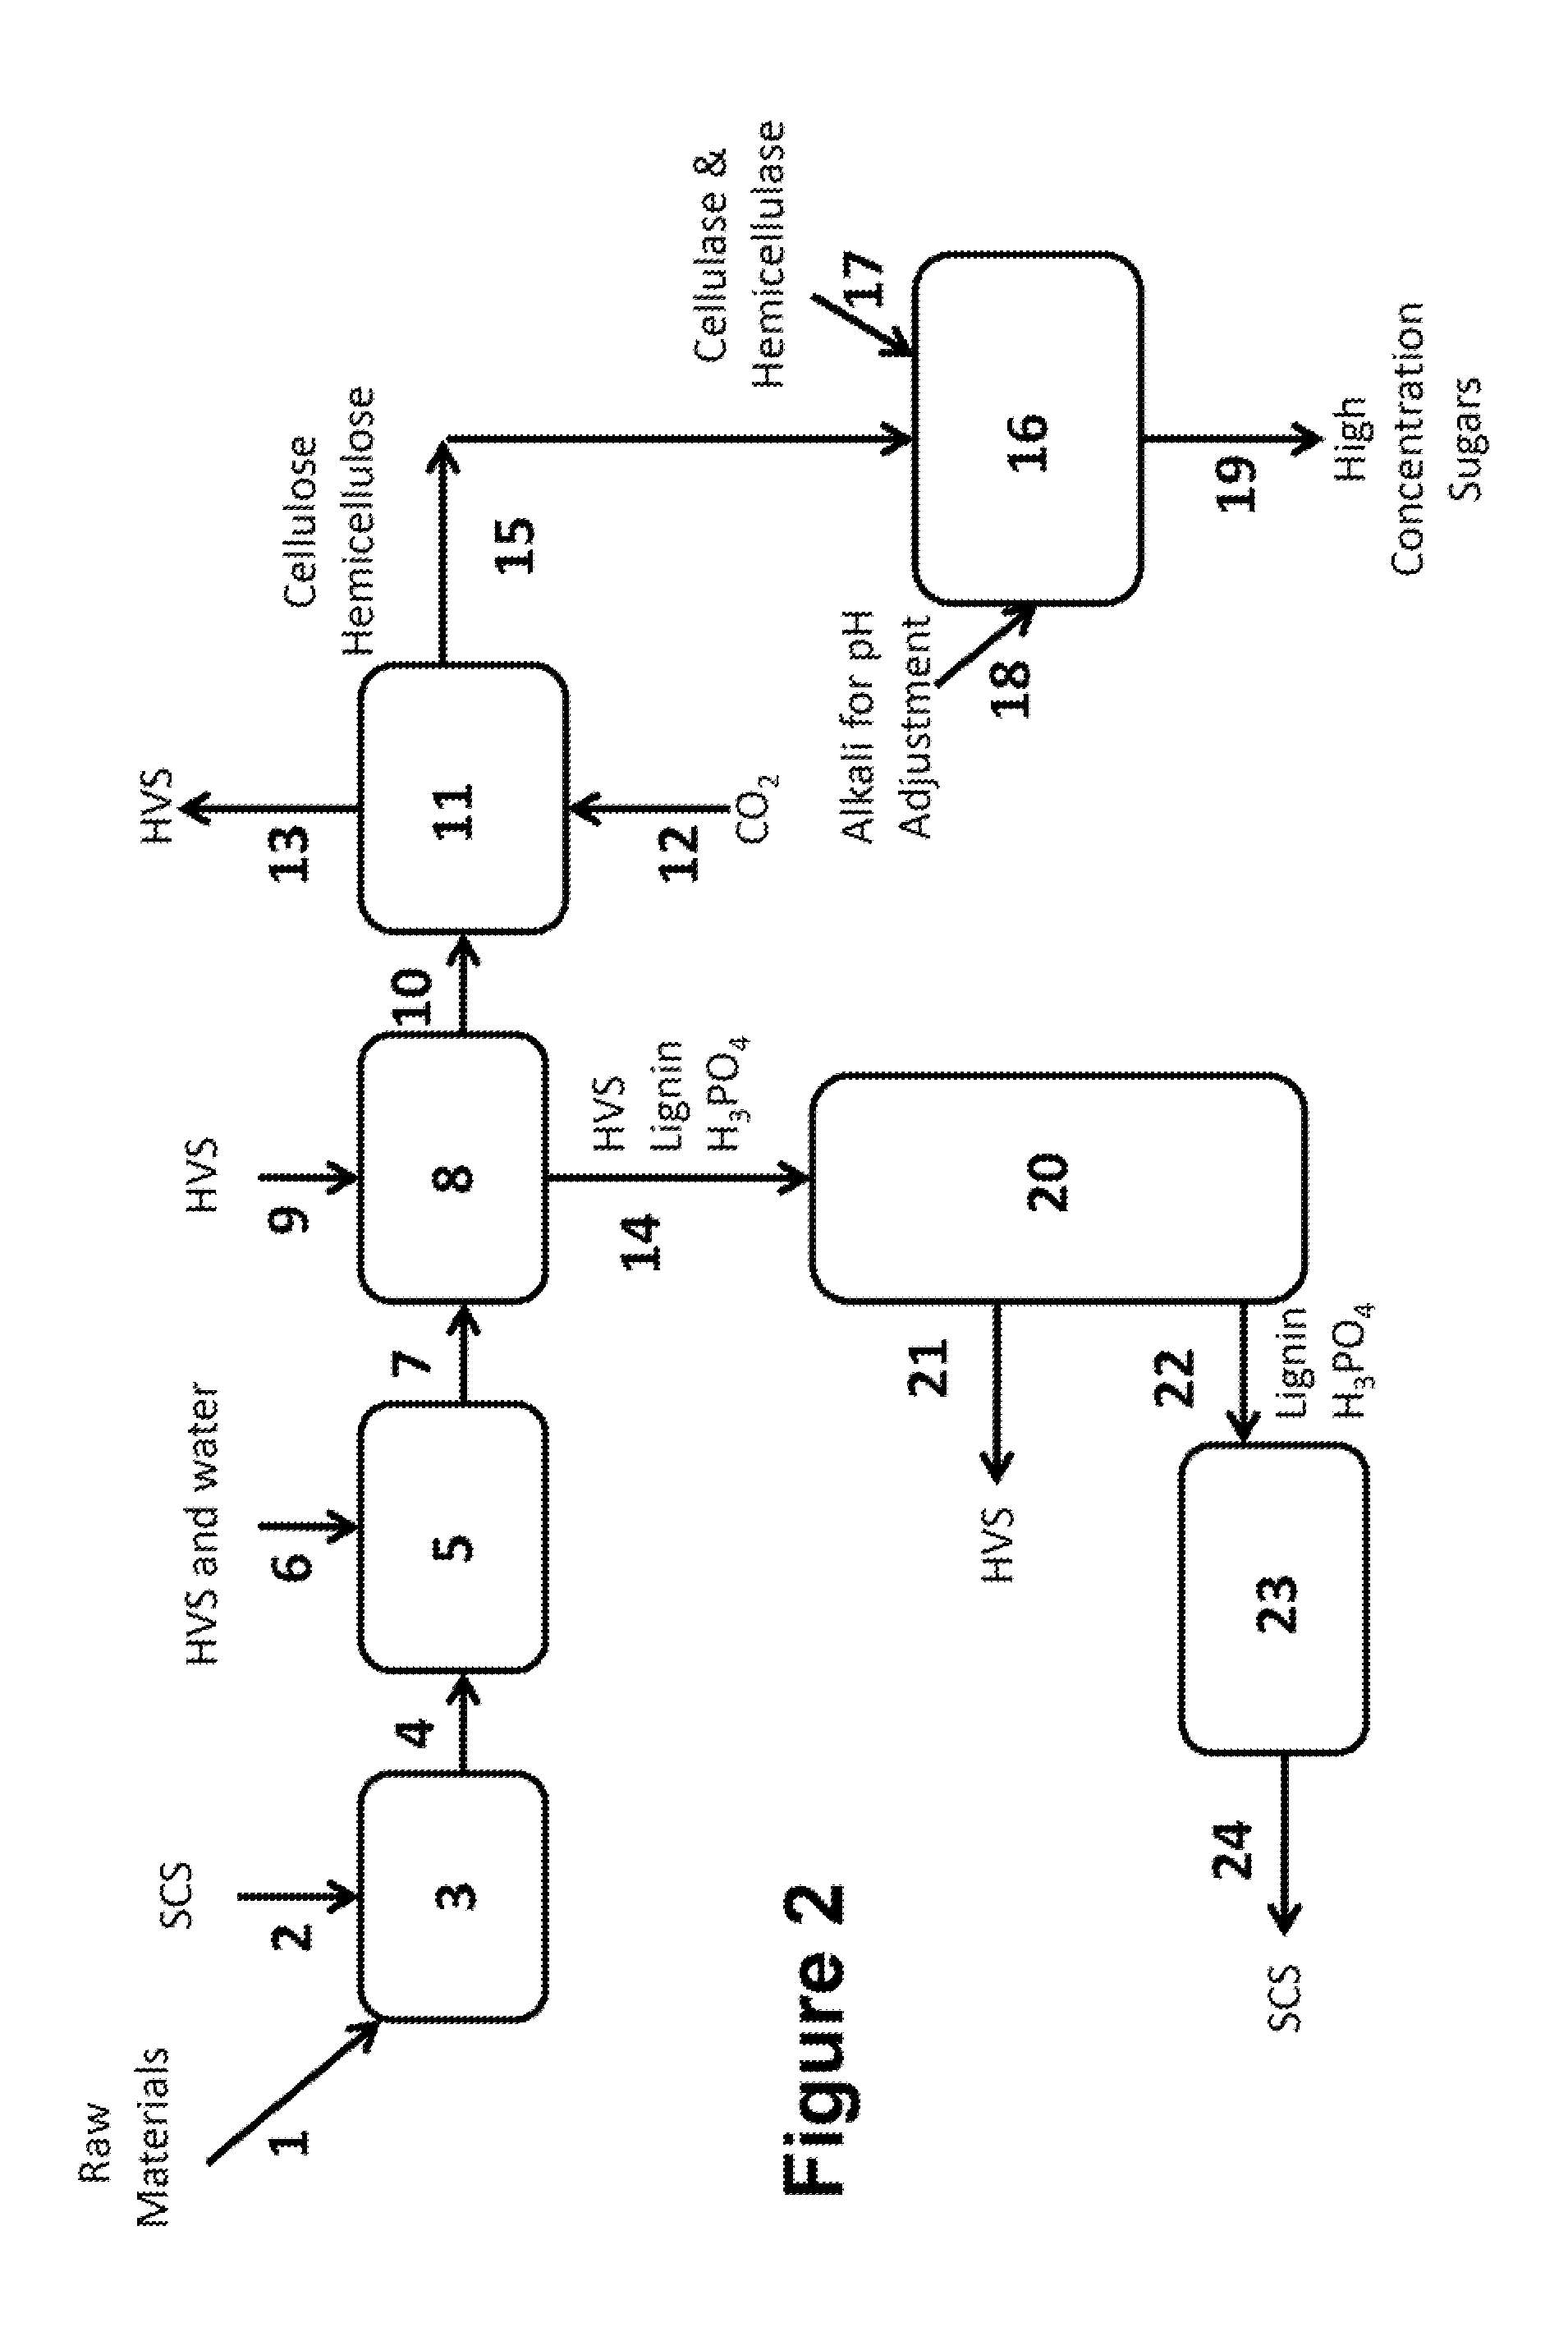 Method and apparatus for lignocellulose pretreatment using a super-cellulose-solvent and highly volatile solvents